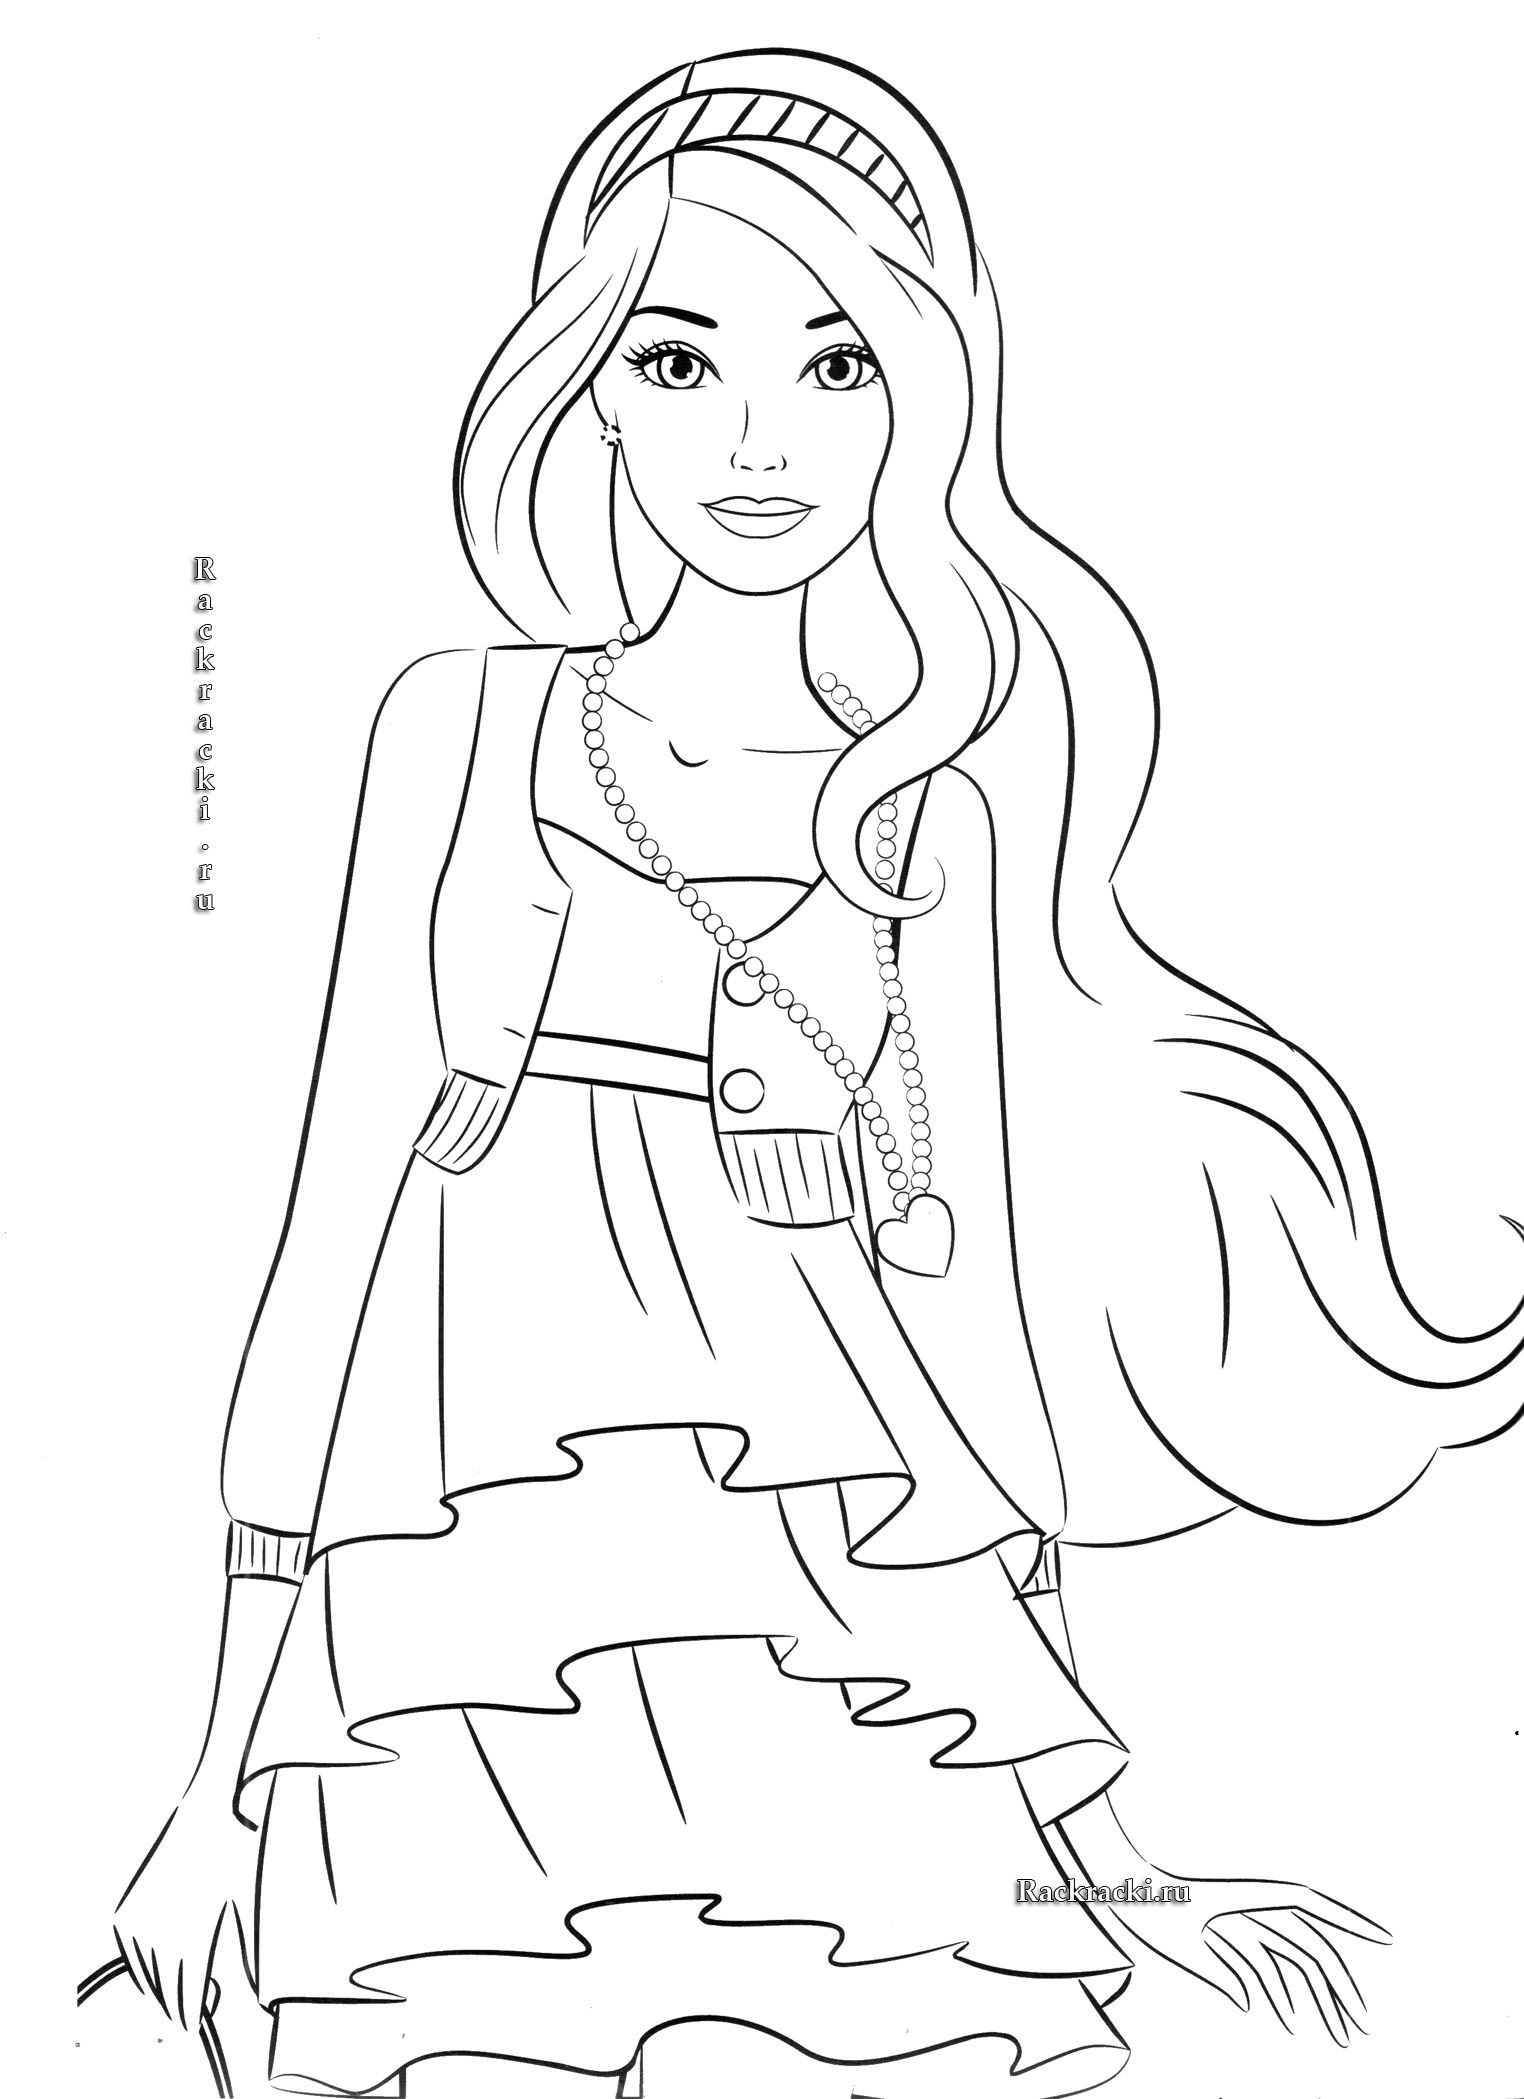 coloring page download barbie